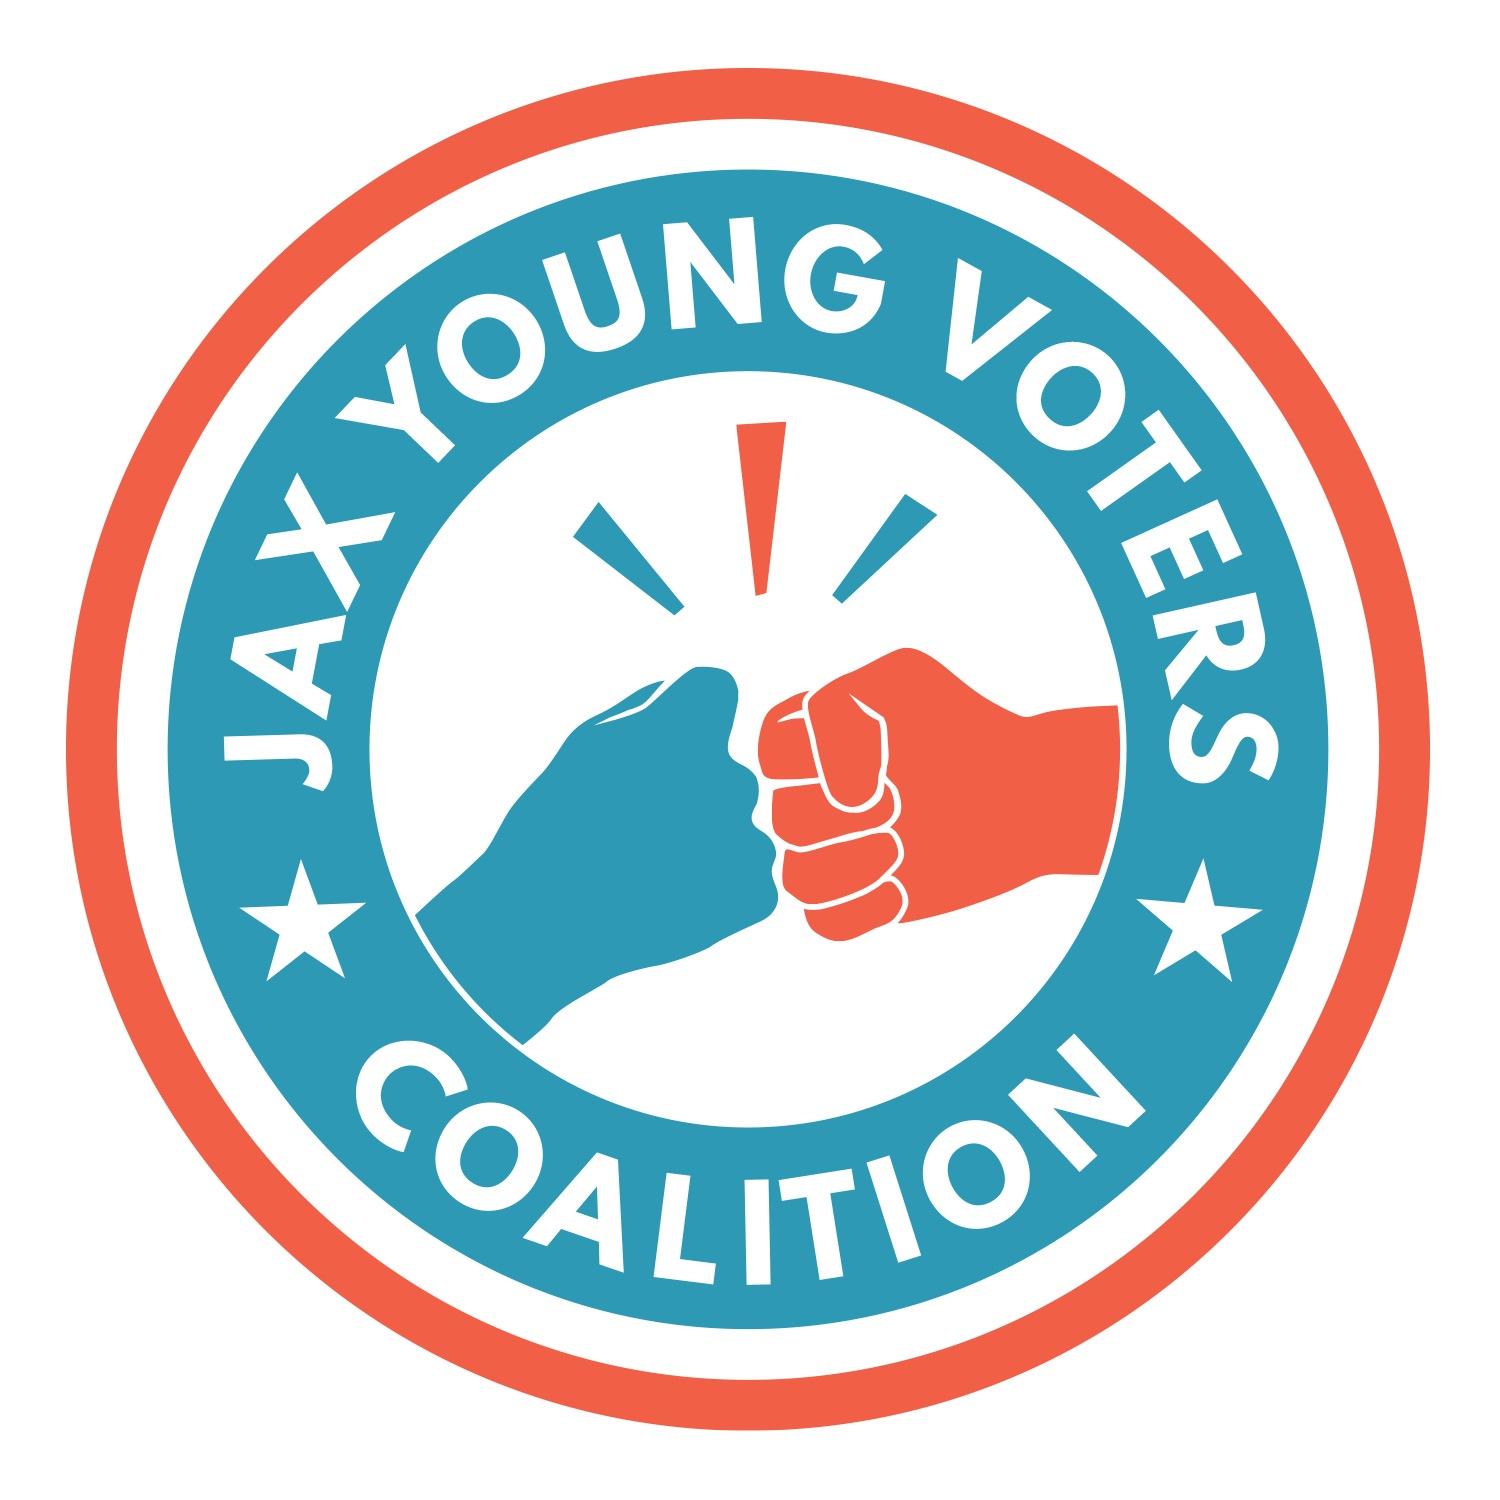 We are a non-partisan organization working to engage voters age 18-40 in voting and political advocacy in Jacksonville. #bumpupthevote